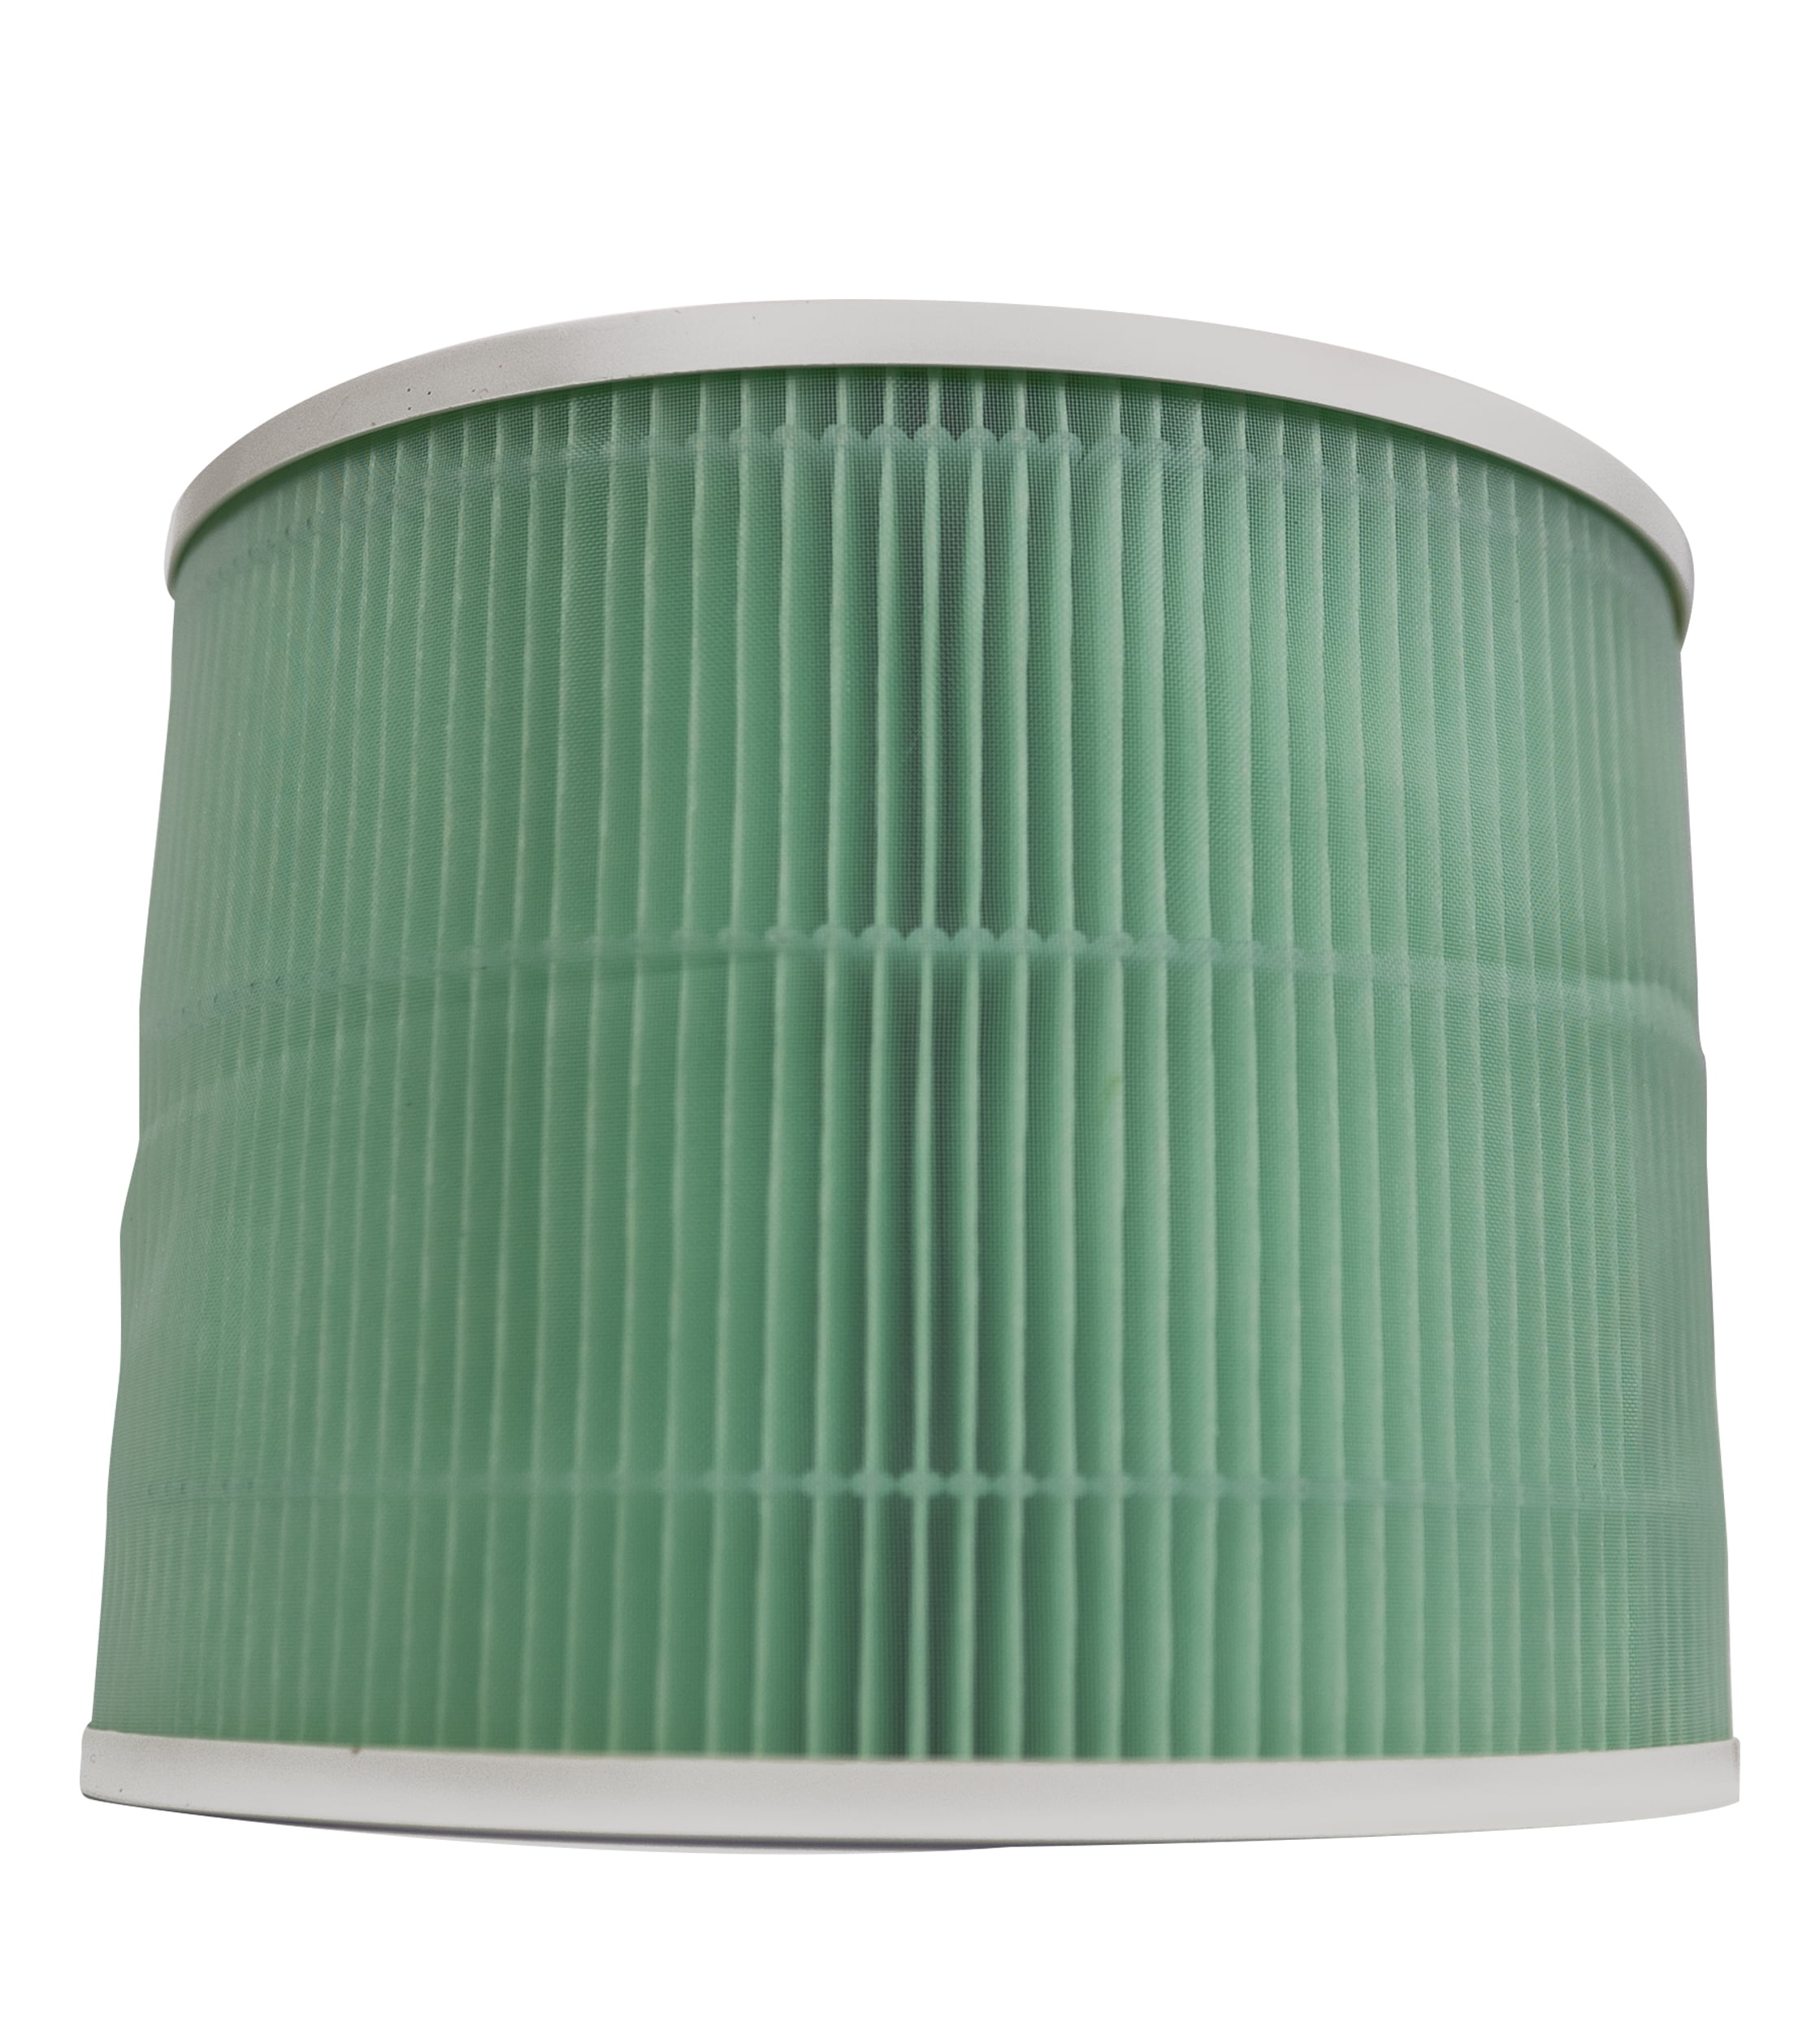 Filter-Monster 3-in-1 True HEPA replacement filter compatible with